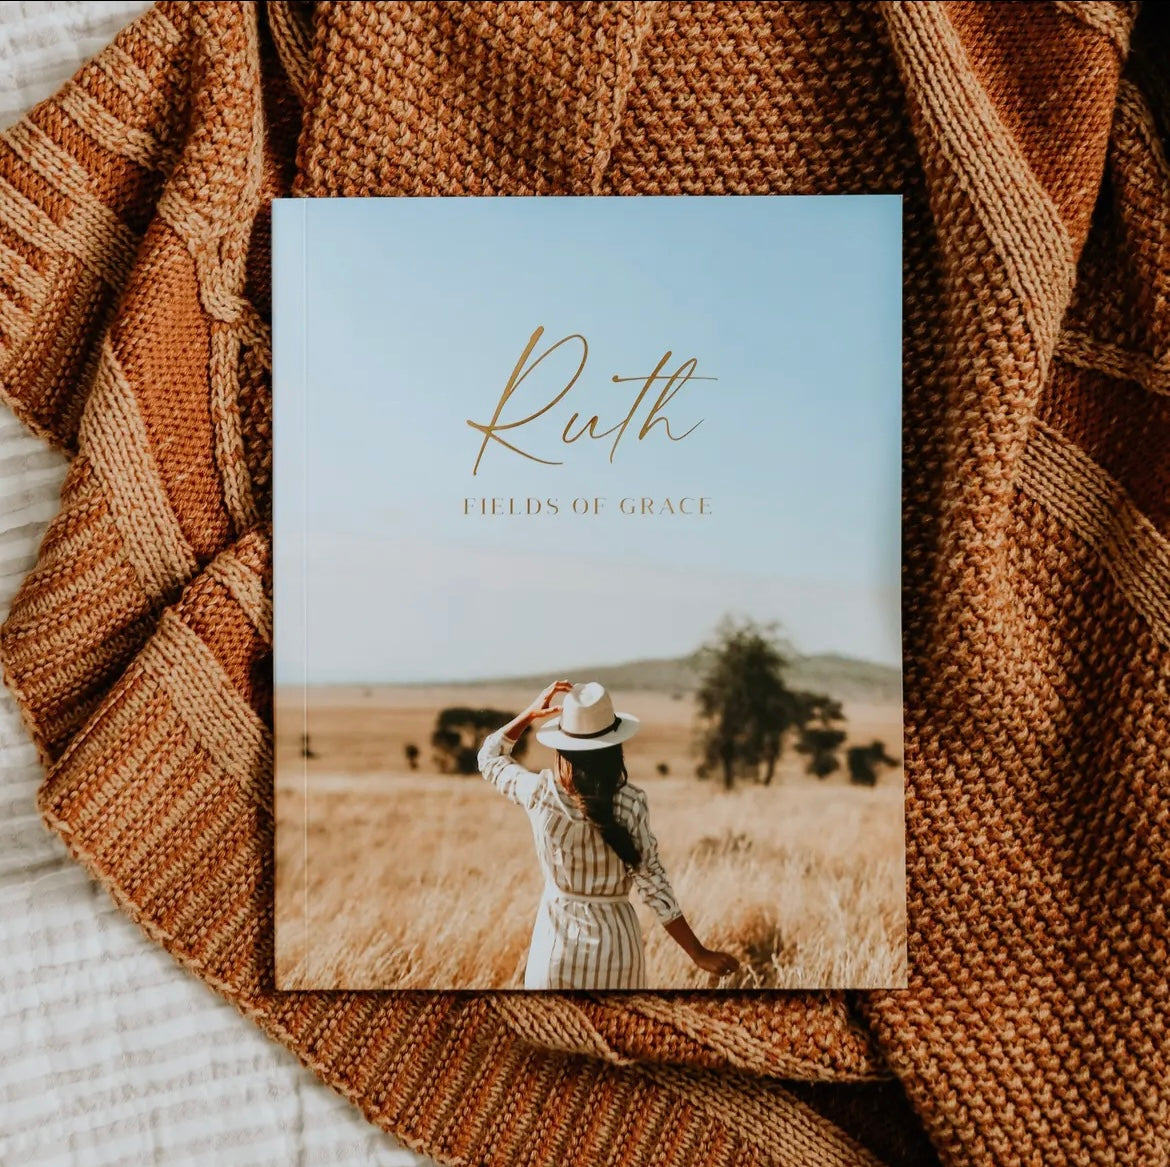 "Fields of Grace" : a study on Ruth